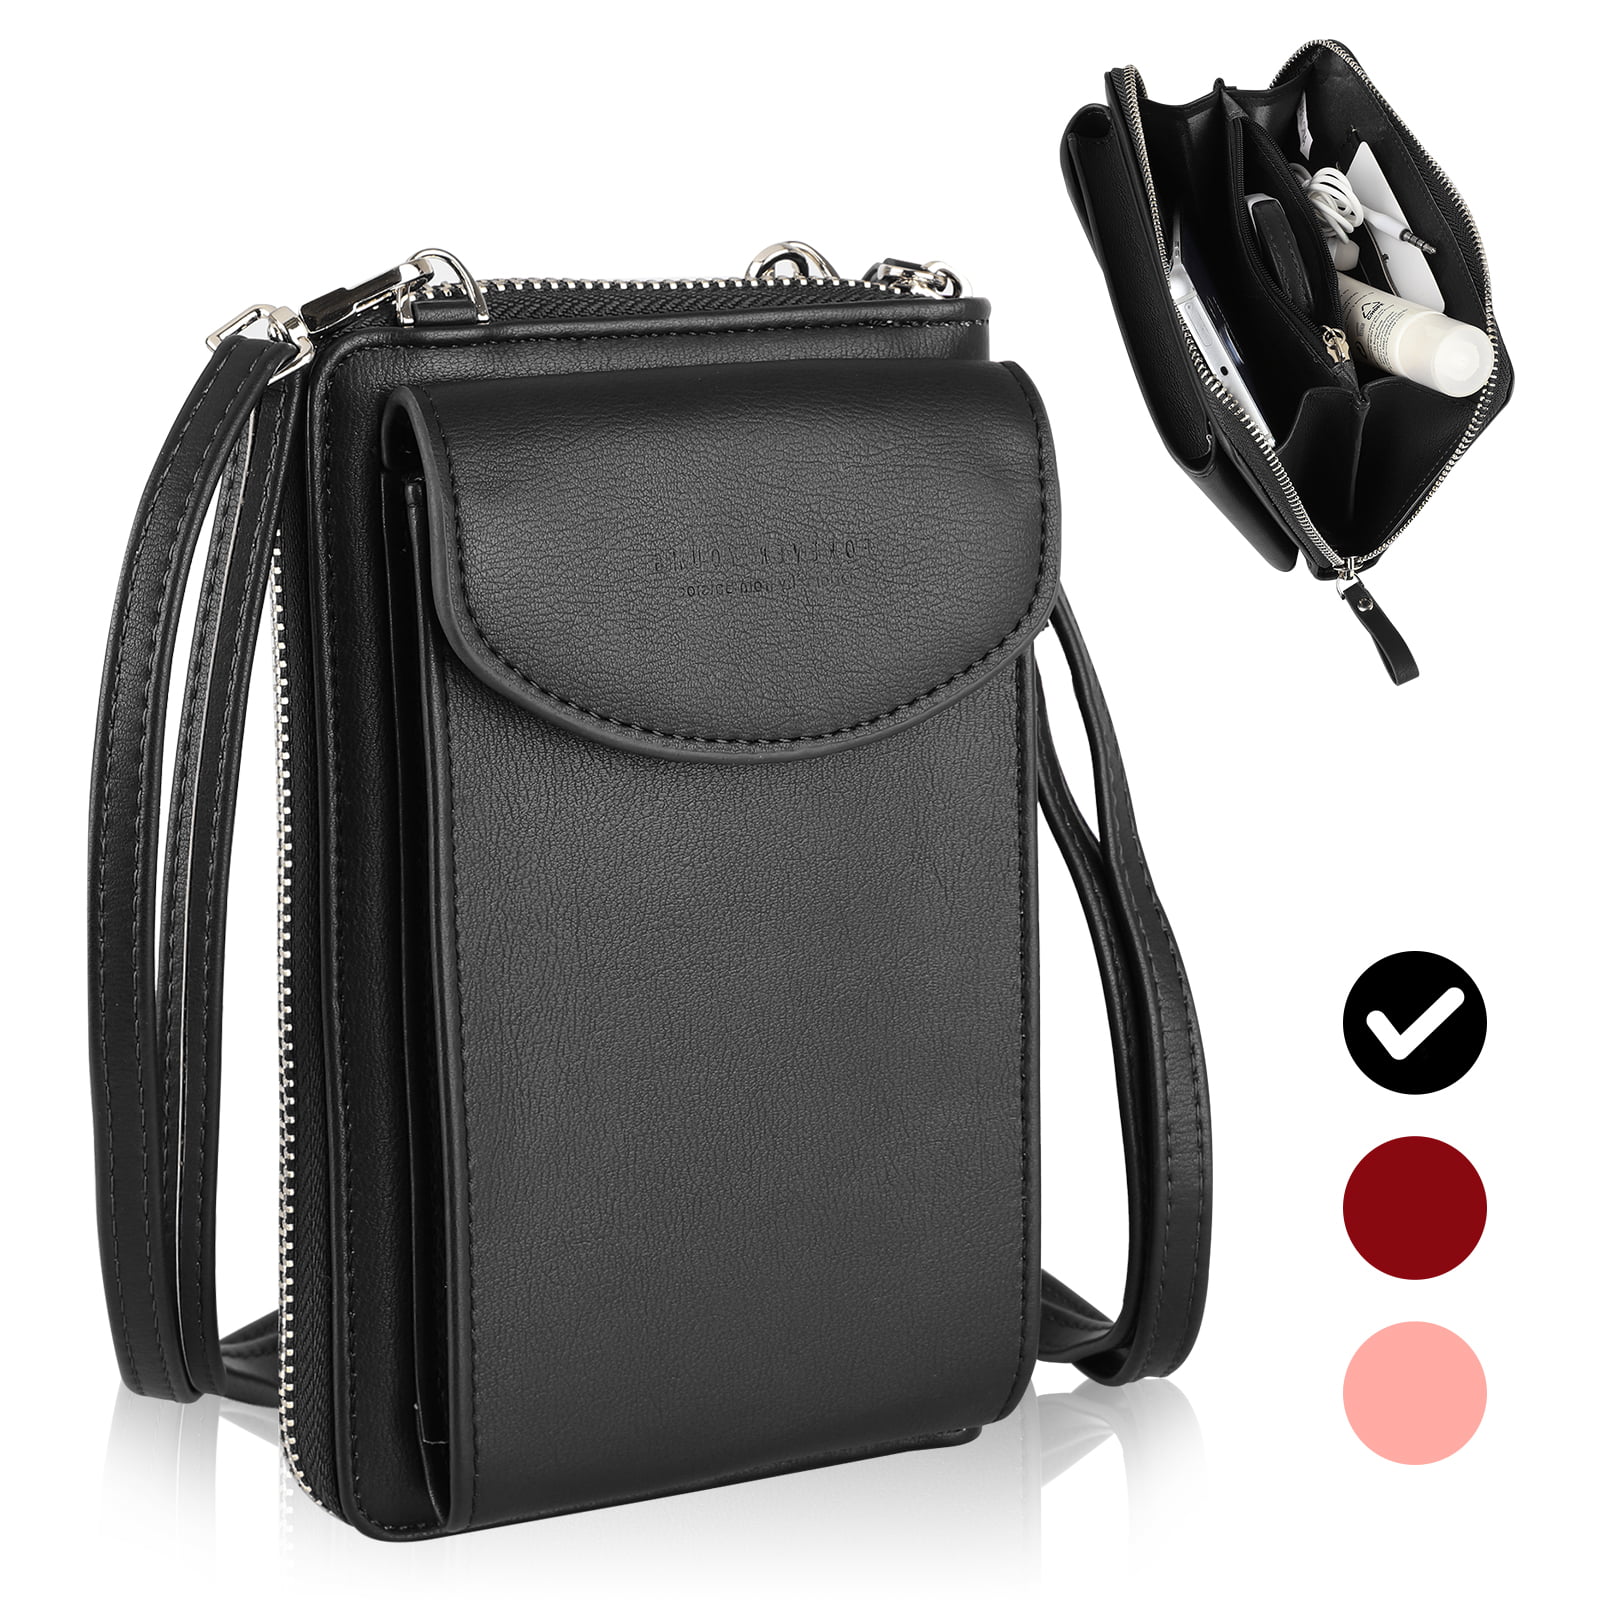 Mini Cross-body Cell Phone Shoulder Bag Wallet Purse For iPhone Xs Max 8 Plus 